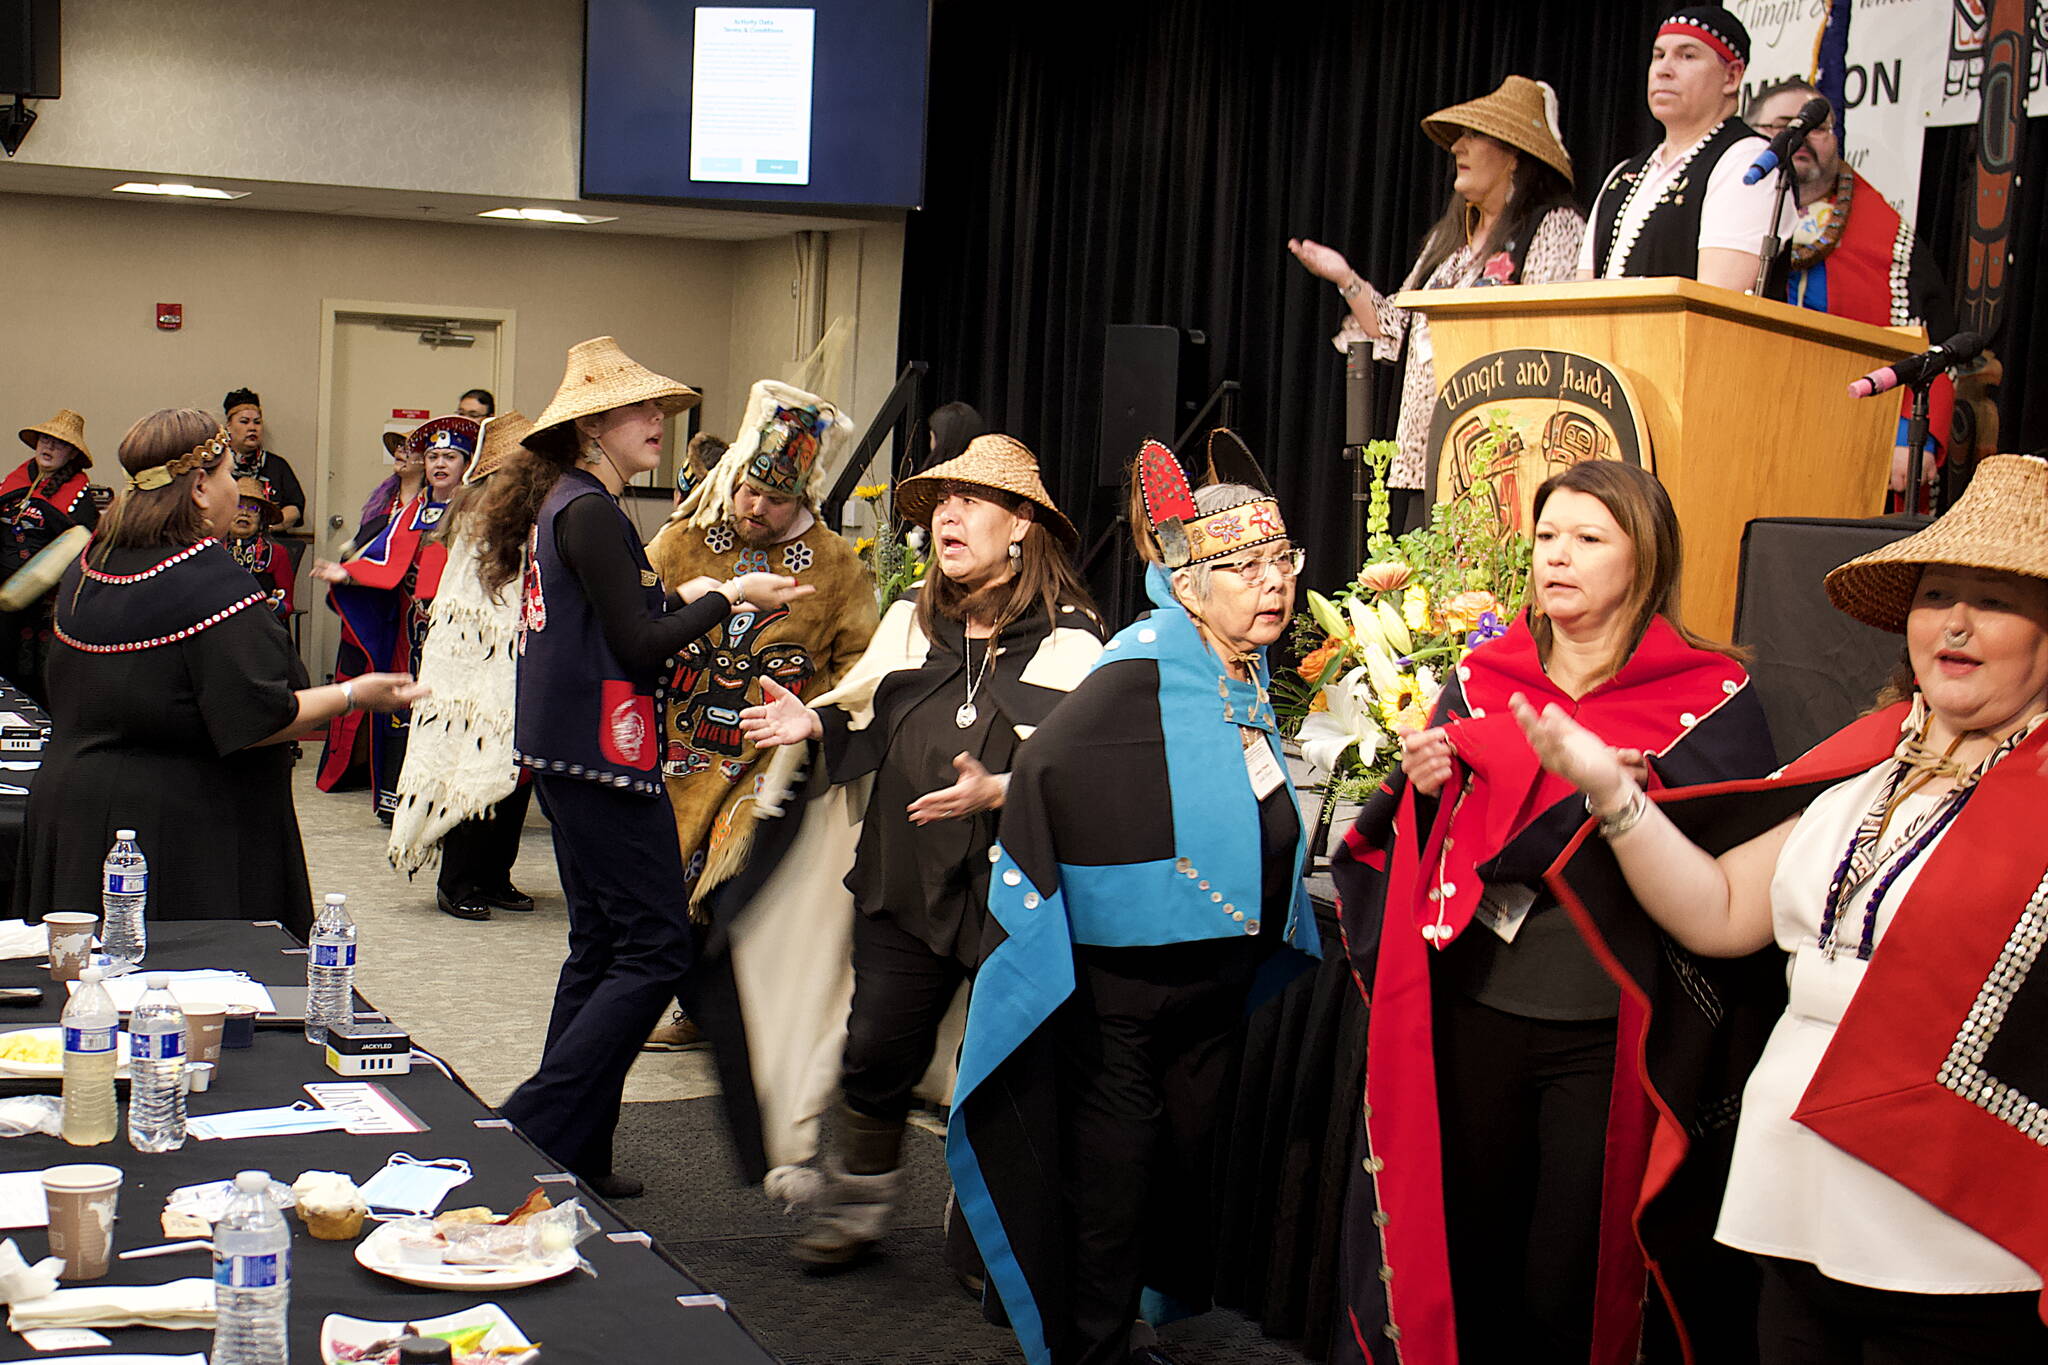 The Eagle/Raven Dance Group gathers at the stage in the main room of Elizabeth Peratrovich Hall on Wednesday morning to mark the grand entrance of delegates to the 88th annual tribal assembly of the Central Council of the Tlingit and Haida Indian Tribes of Alaska. (Mark Sabbatini / Juneau Empire)